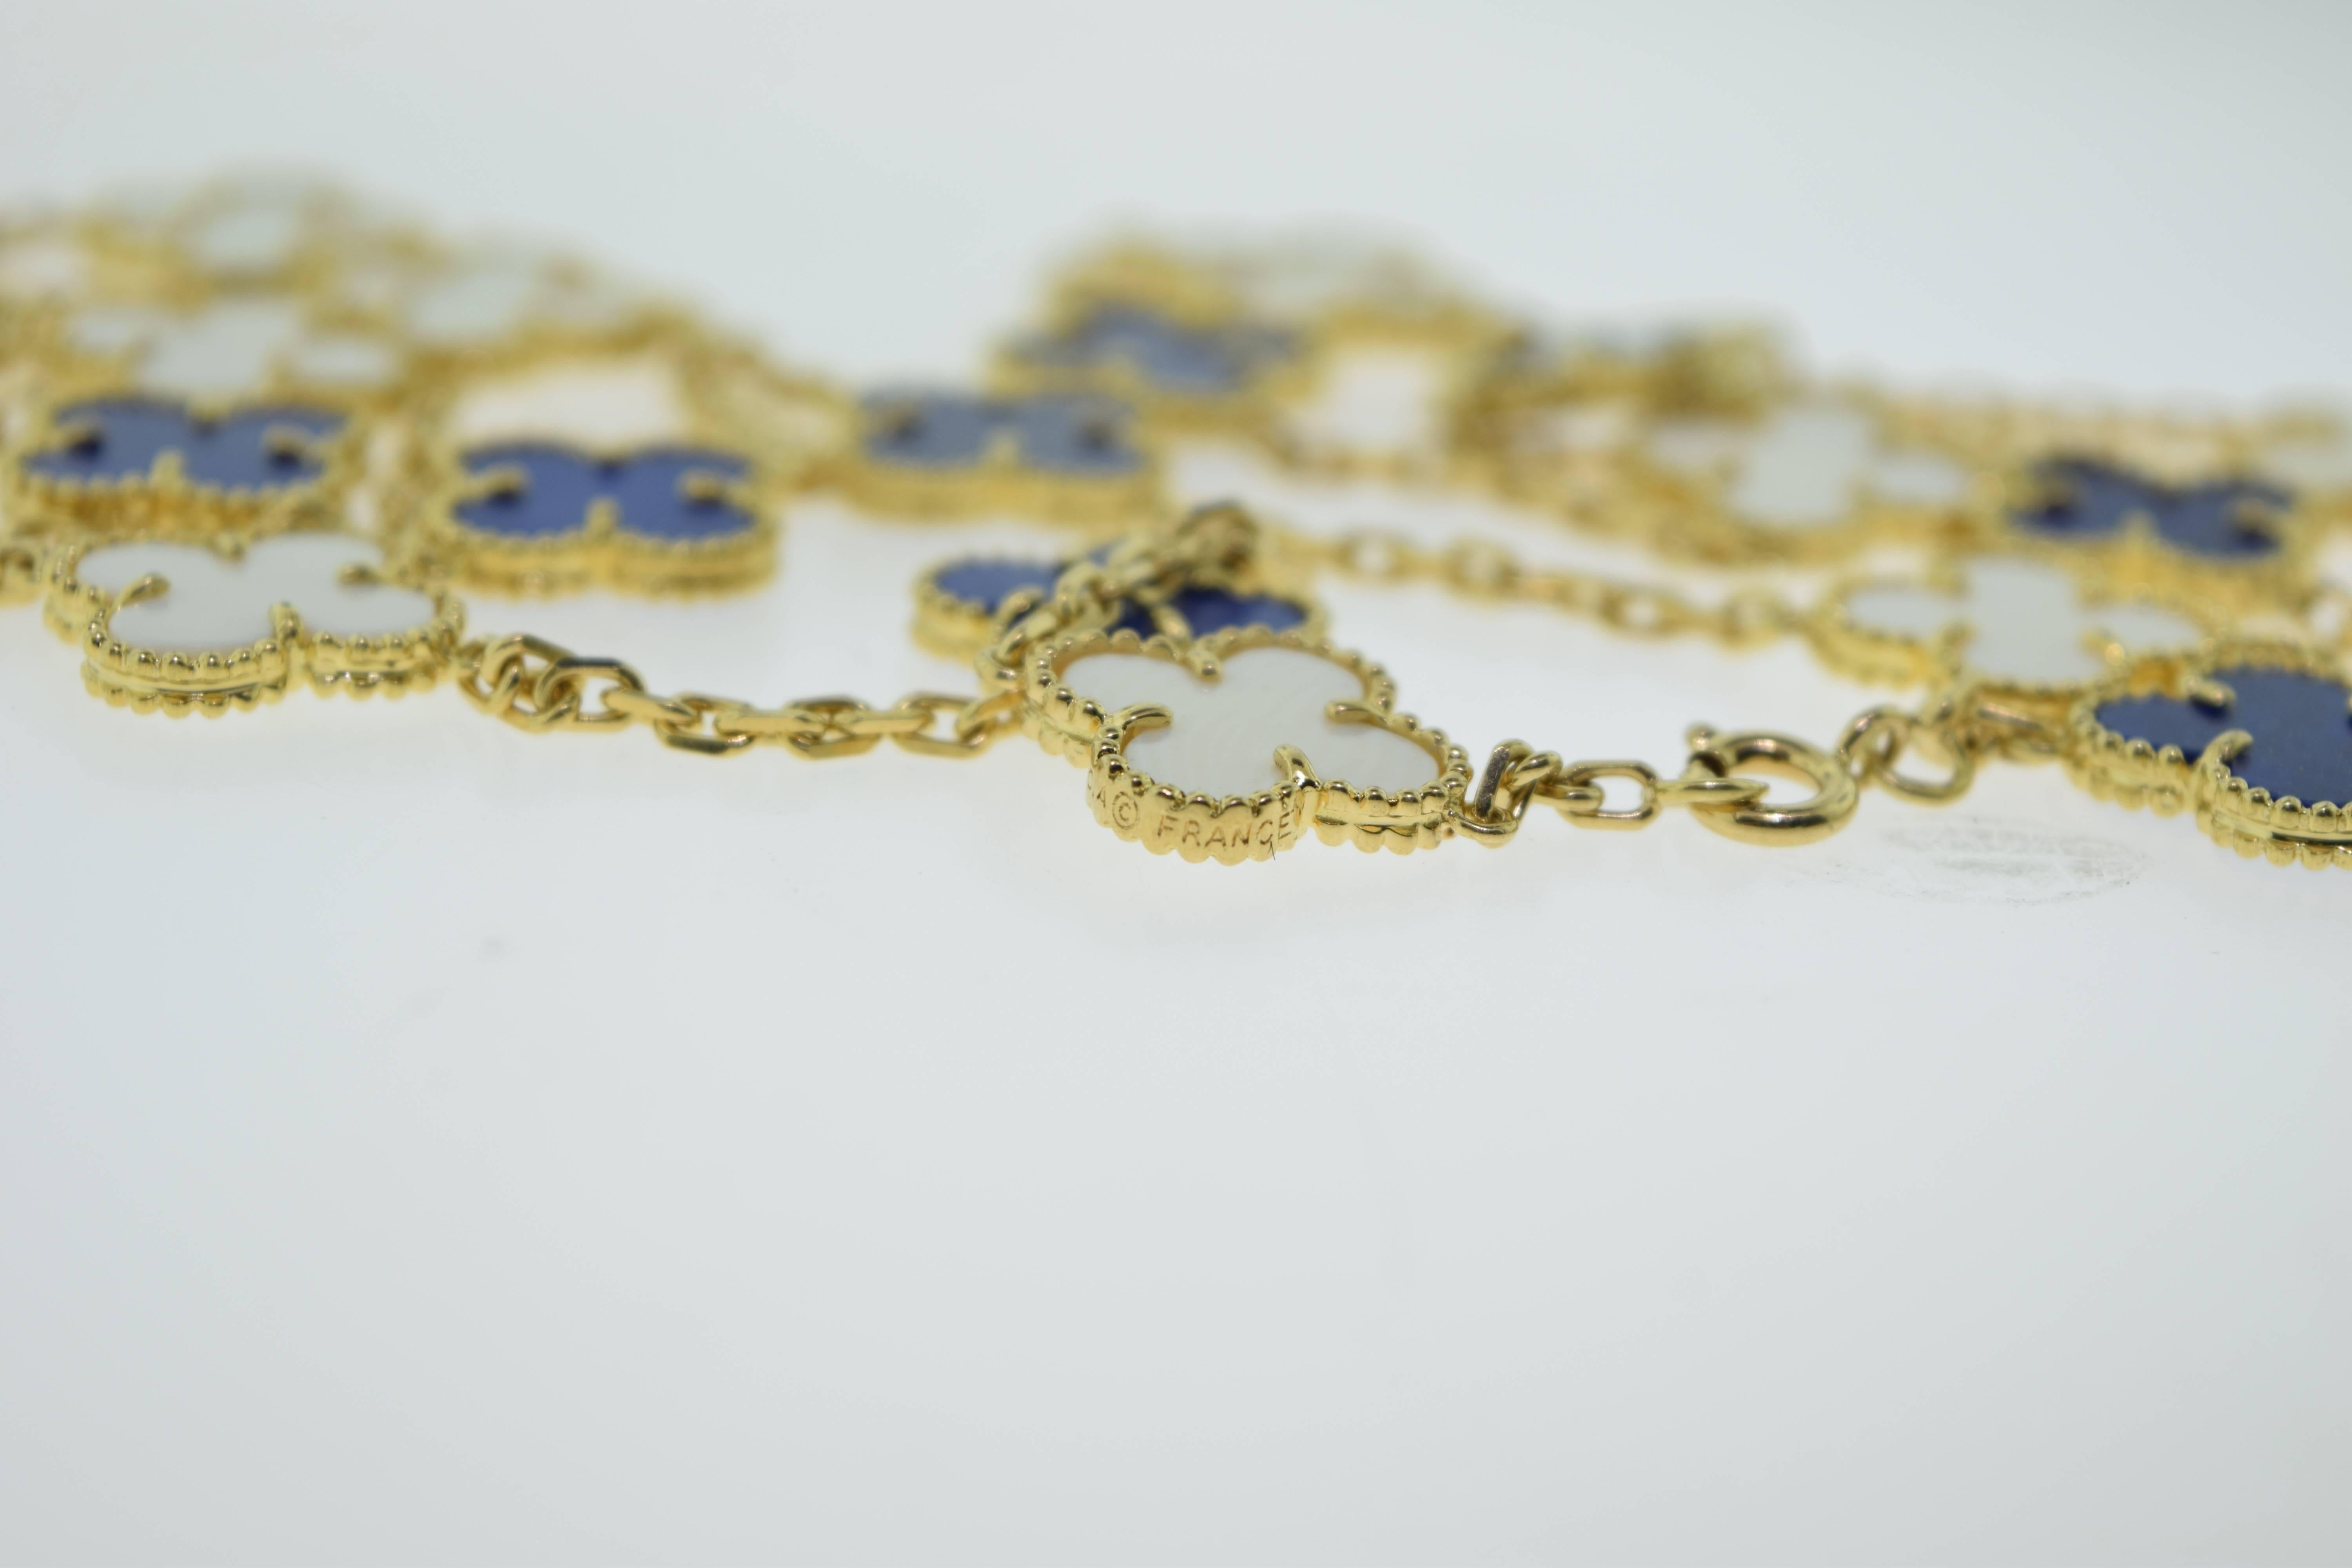 Van Cleef & Arpels Alhambra Lapis Lazuli & White Coral 20 Motif Necklace In Excellent Condition For Sale In Miami, FL